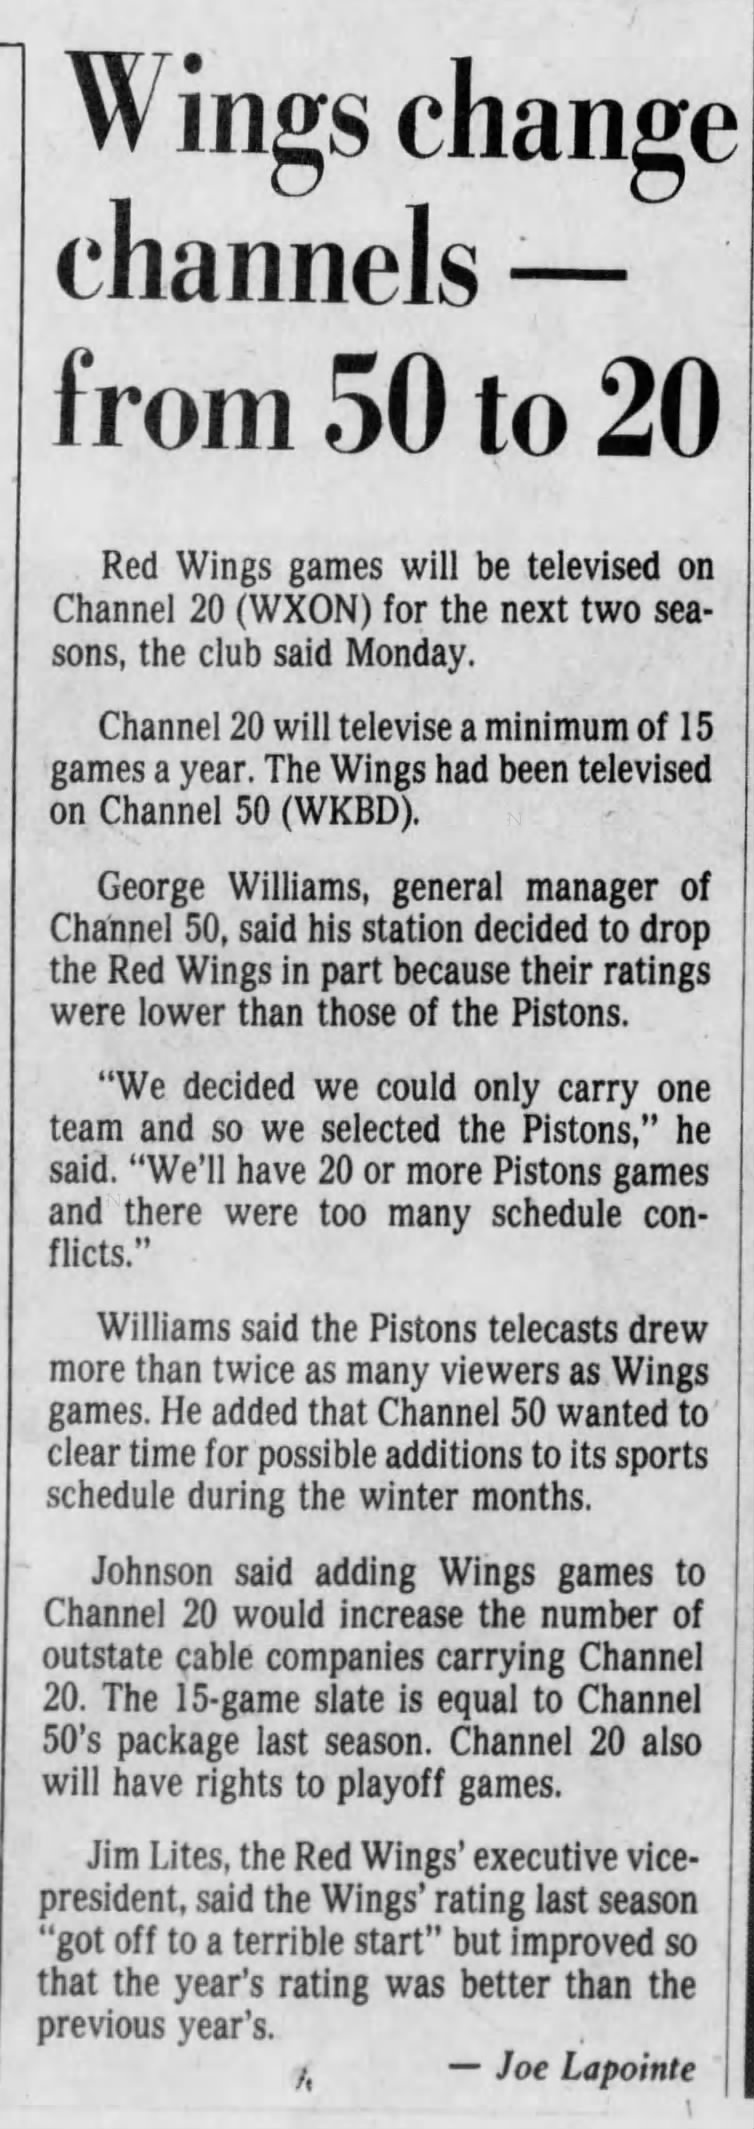 Wings change channels—from 50 to 20